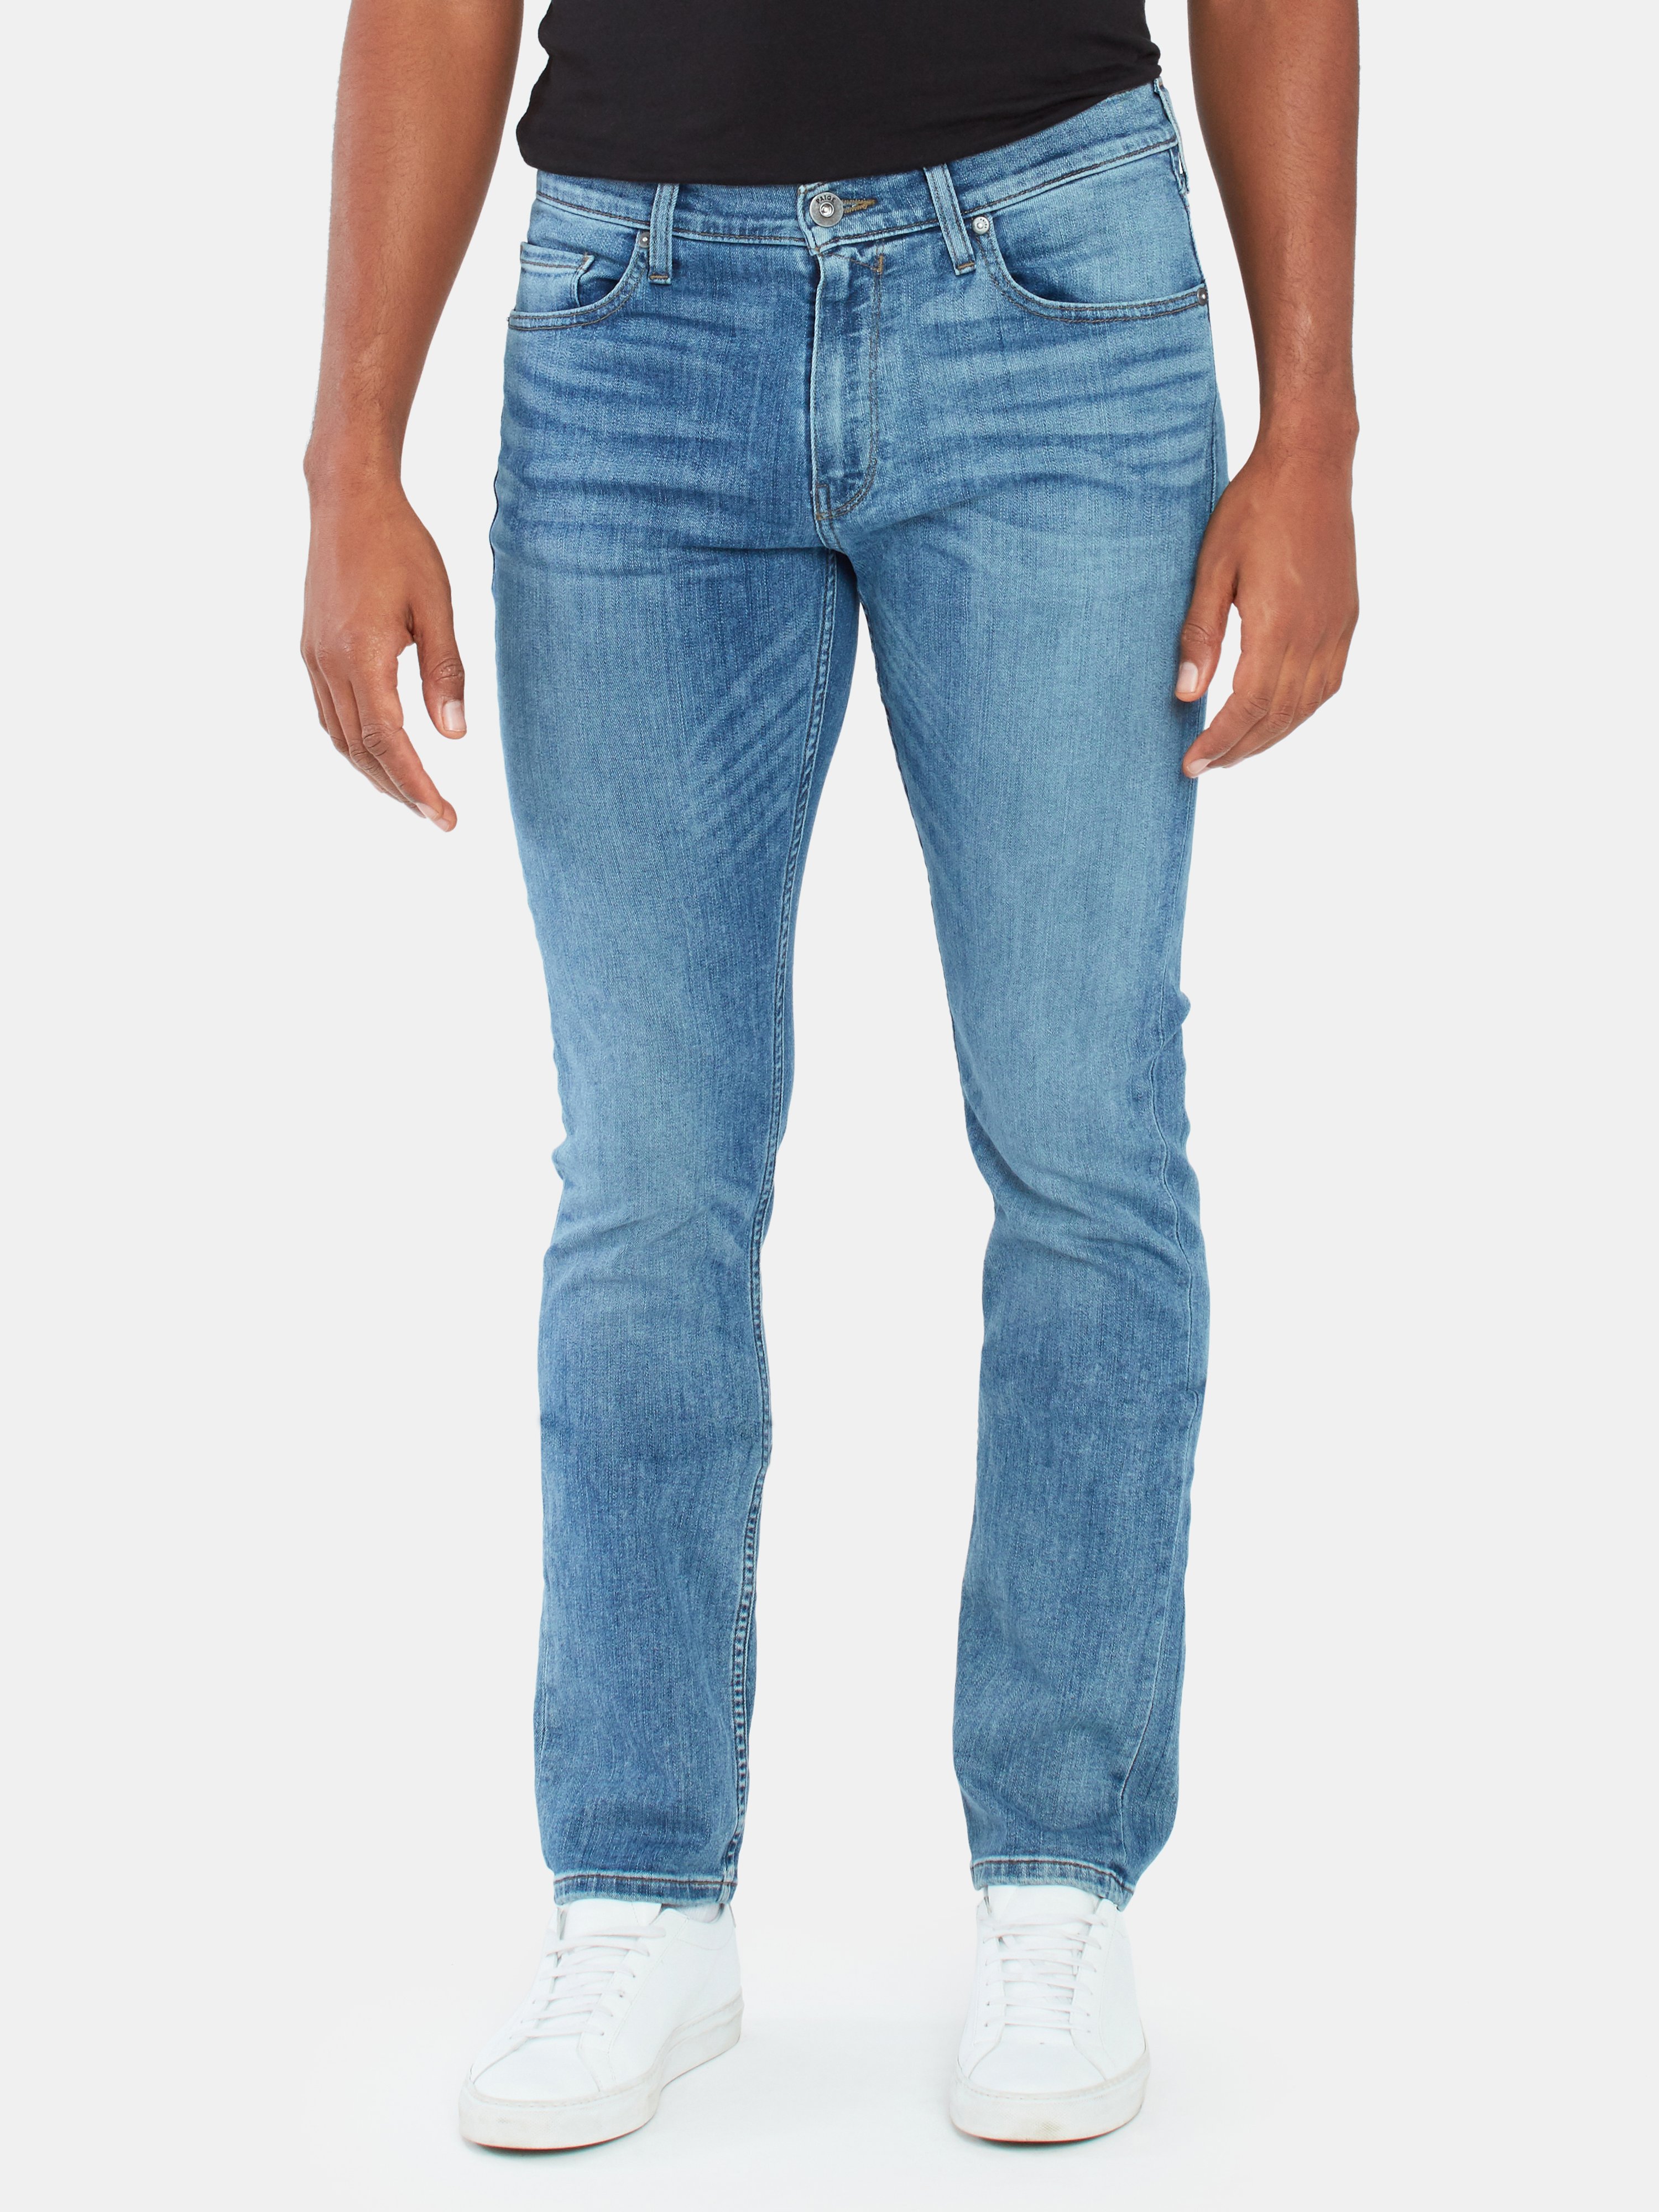 Paige Federal Slim Straight Jeans In Irwin